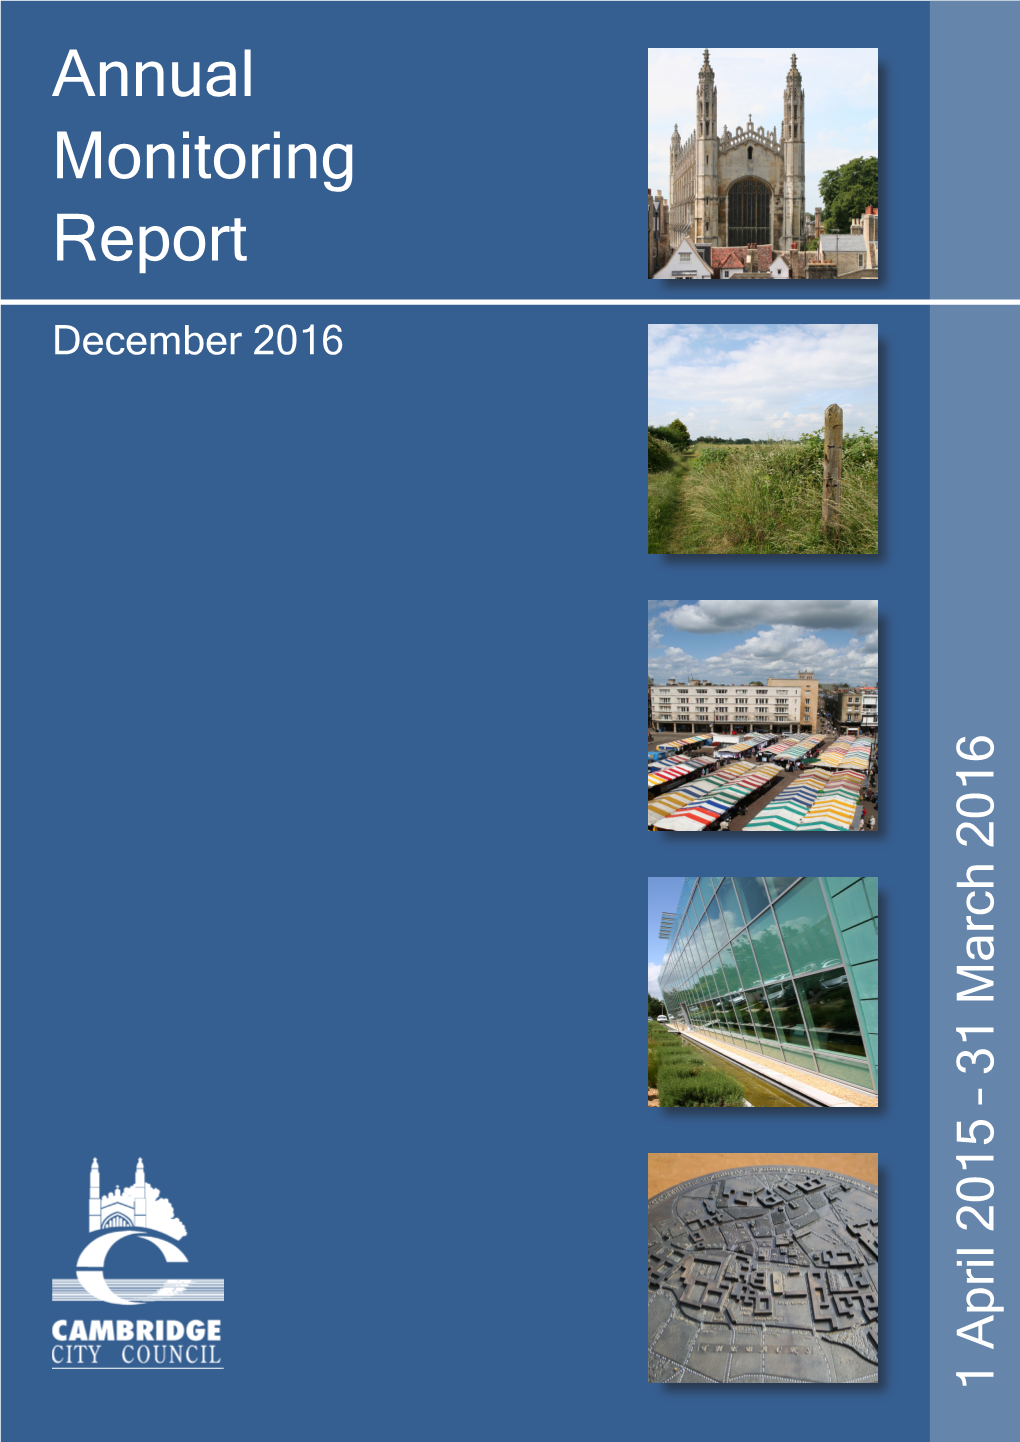 Annual Monitoring Report 2015-2016